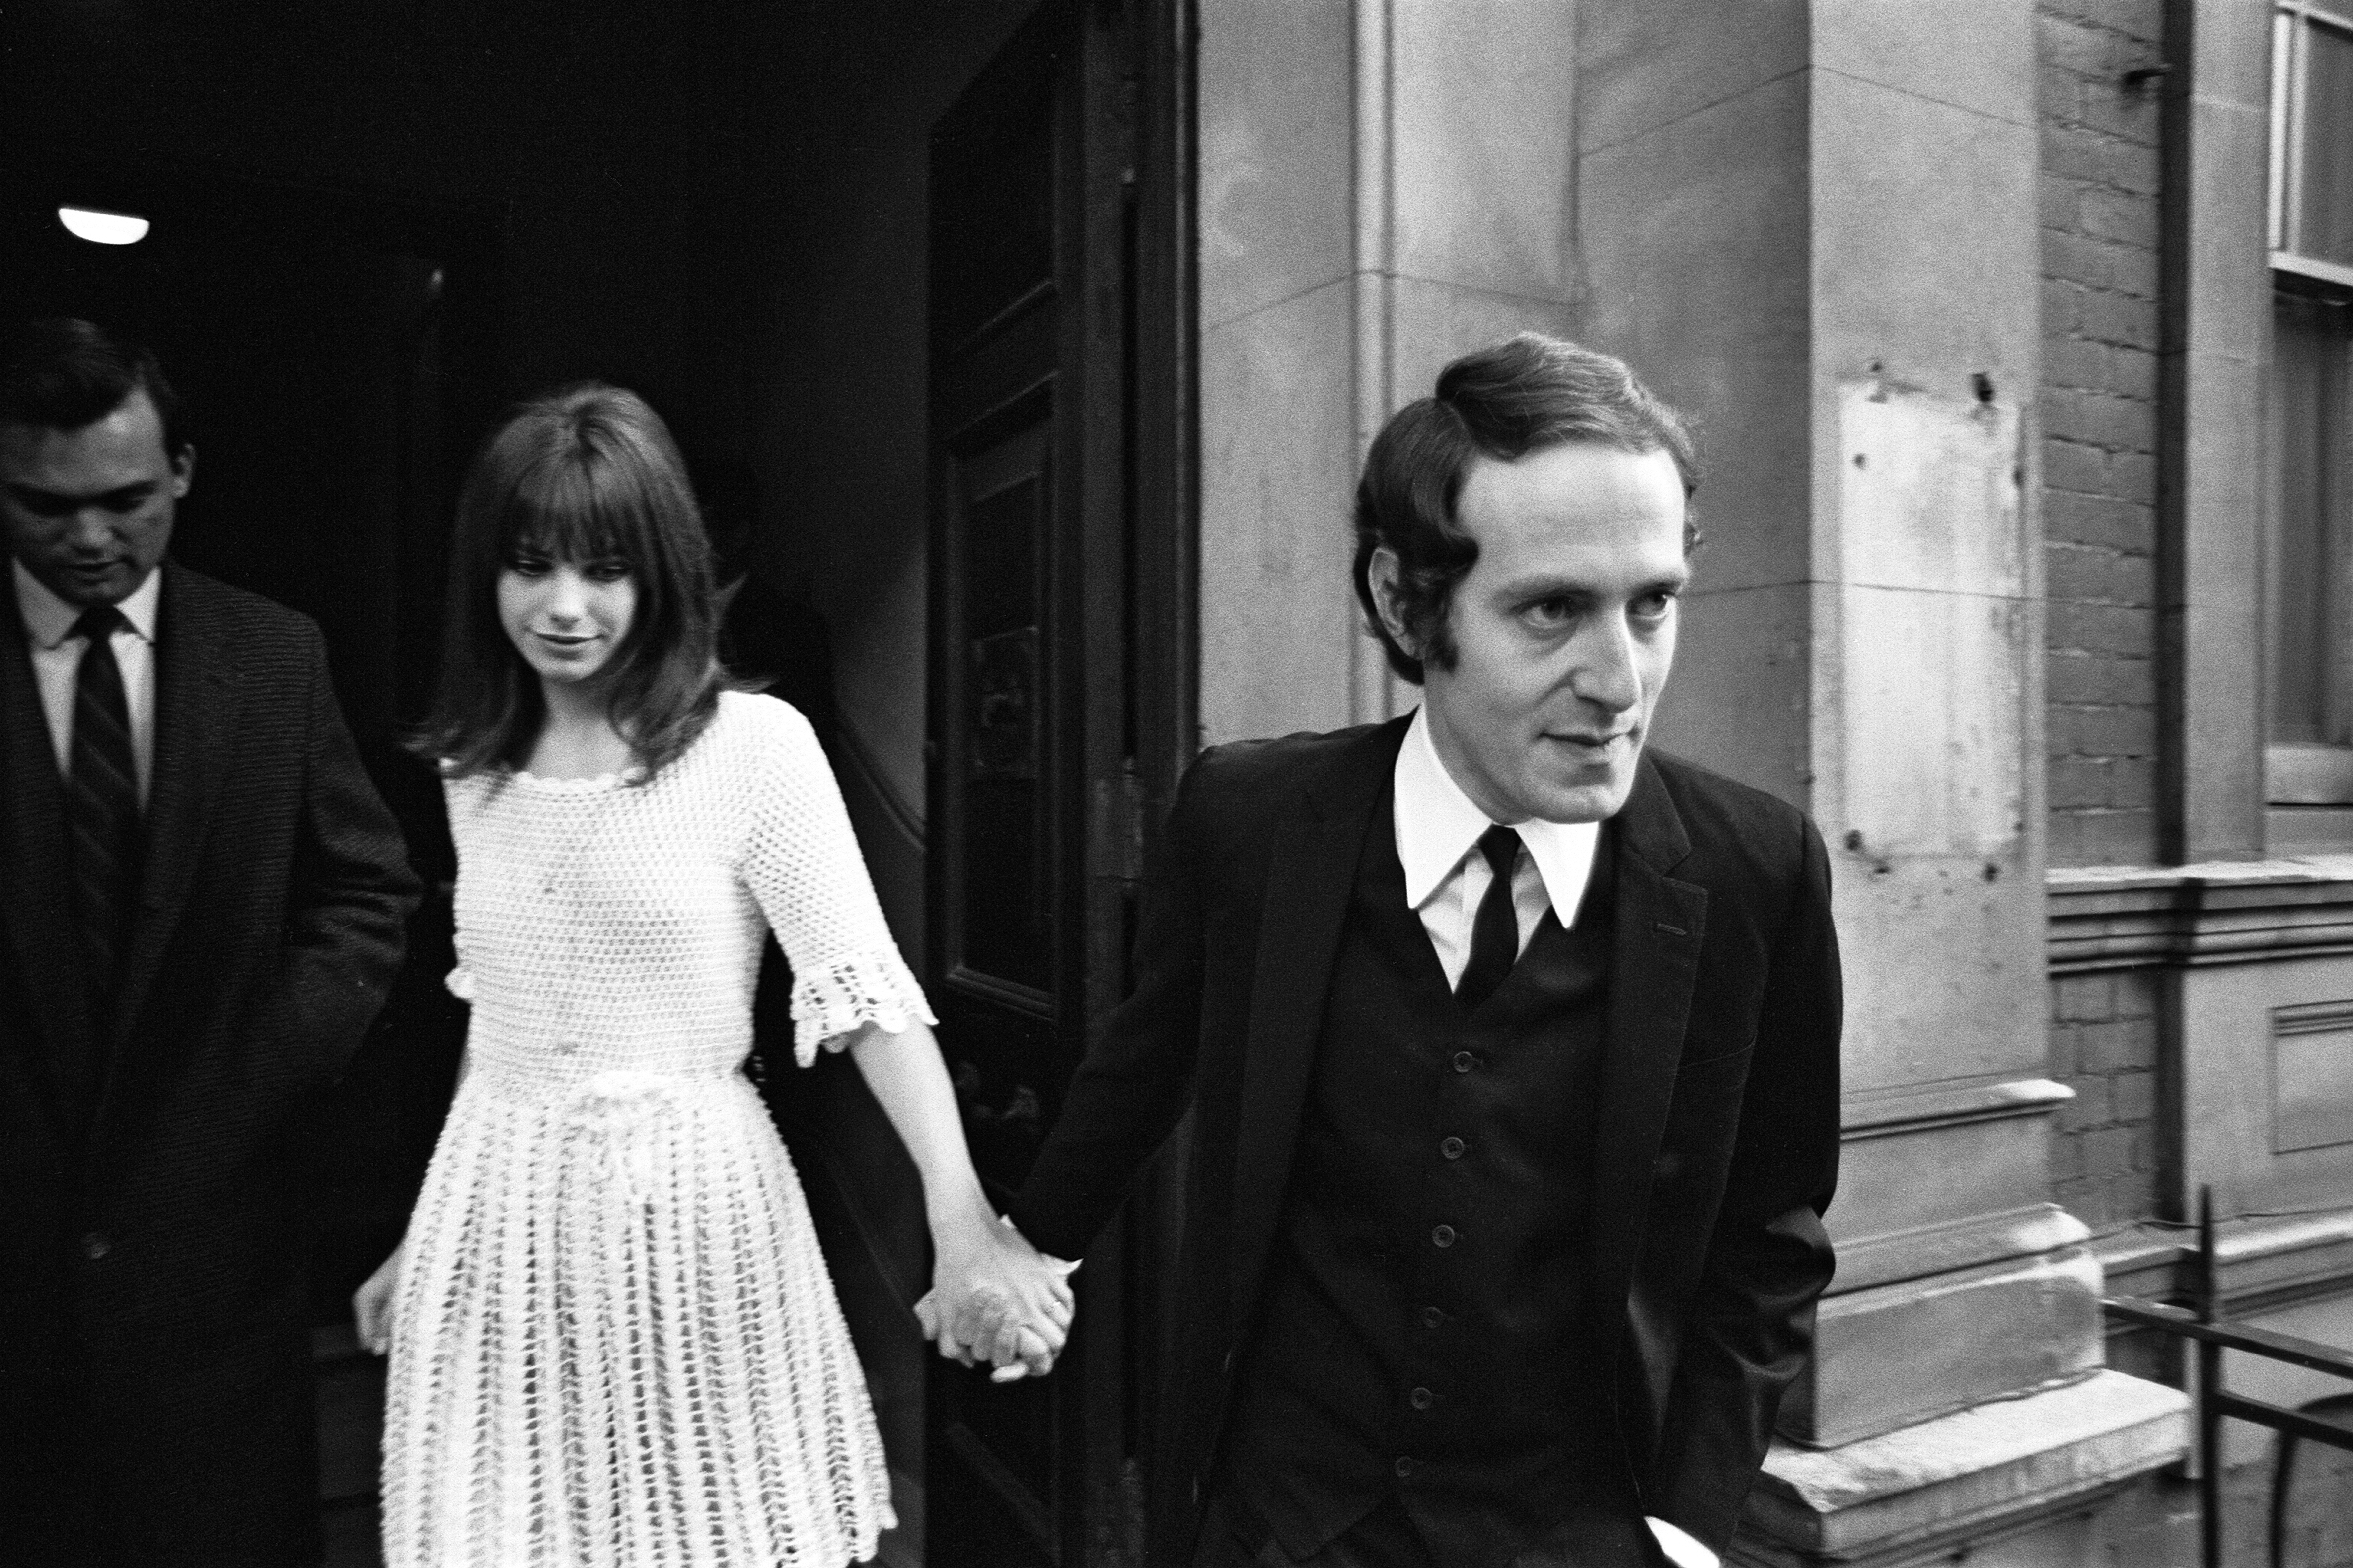 Jane Birkin and John Barry at Chelsea Registry Office in October 1965 in London. | Source: Getty Images